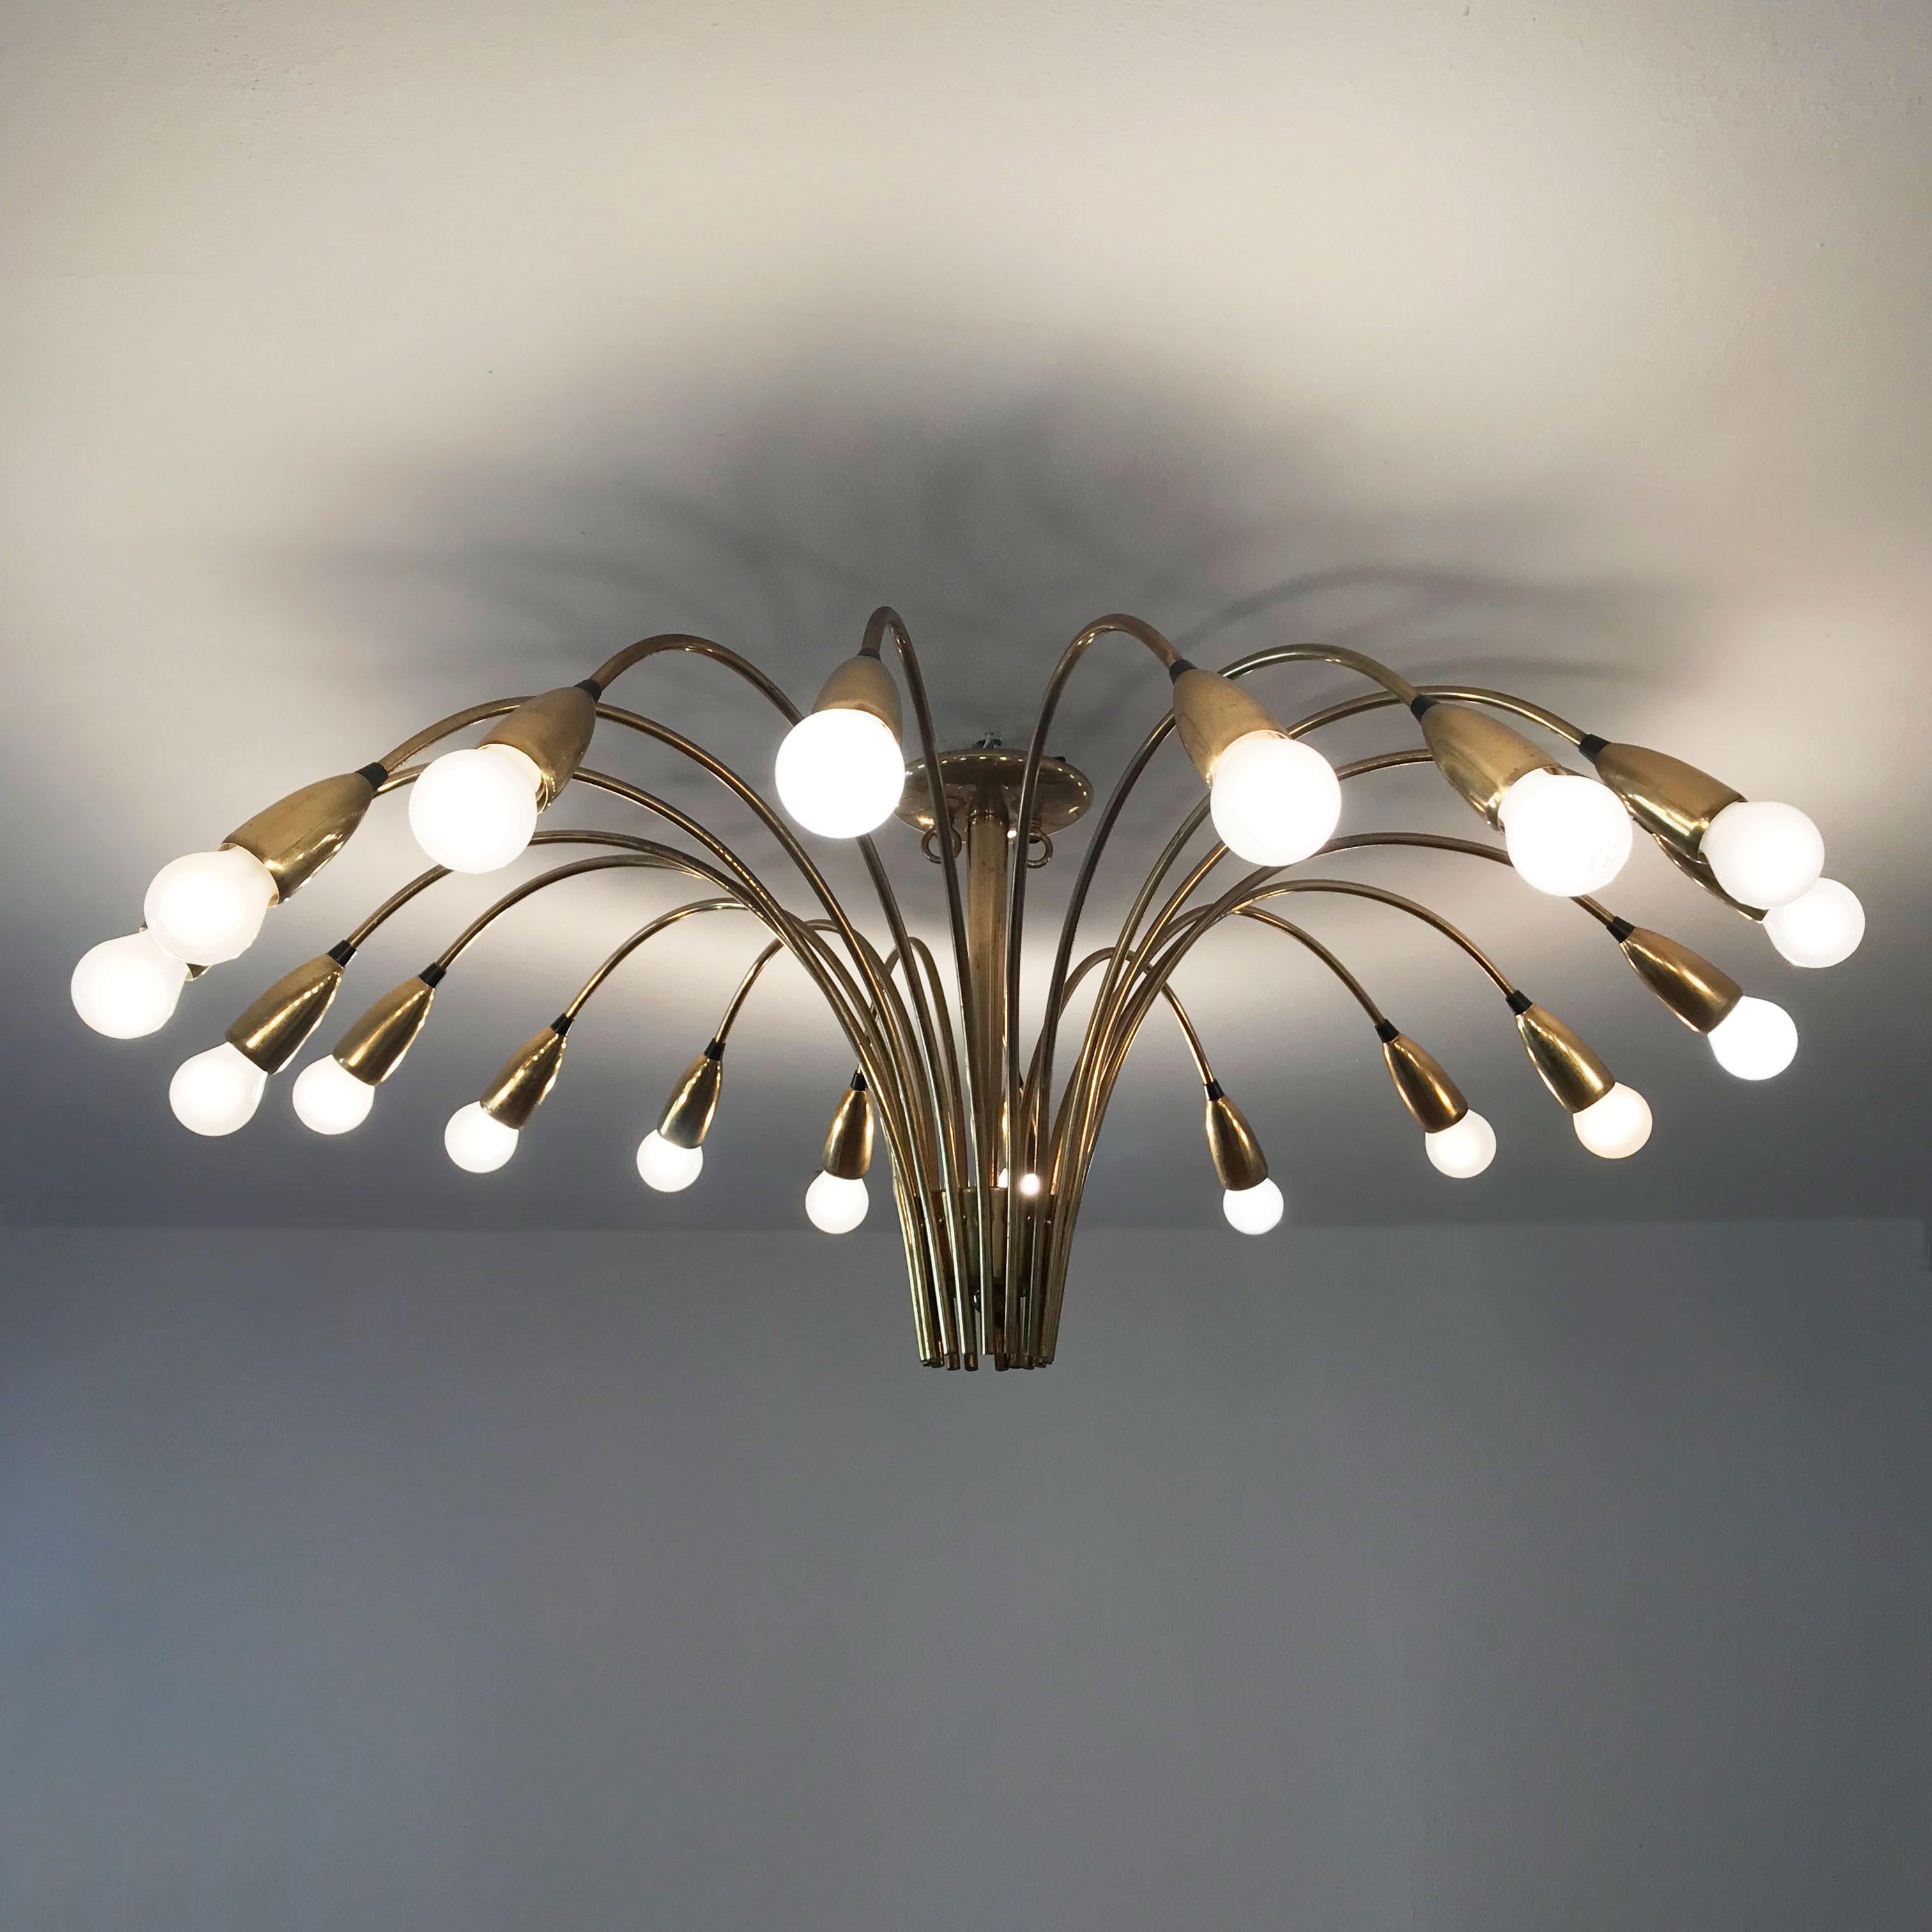 Stunning, gigantic Mid-Century Modern 18-armed Sputnik chandelier or ceiling lamp Spider with a diameter of ca. 47.25'' / 120 cm including bulbs.
Manufactured by Kaiser Leuchten, Germany, 1950s. Executed in brass tubes and sheet.

The chandelier